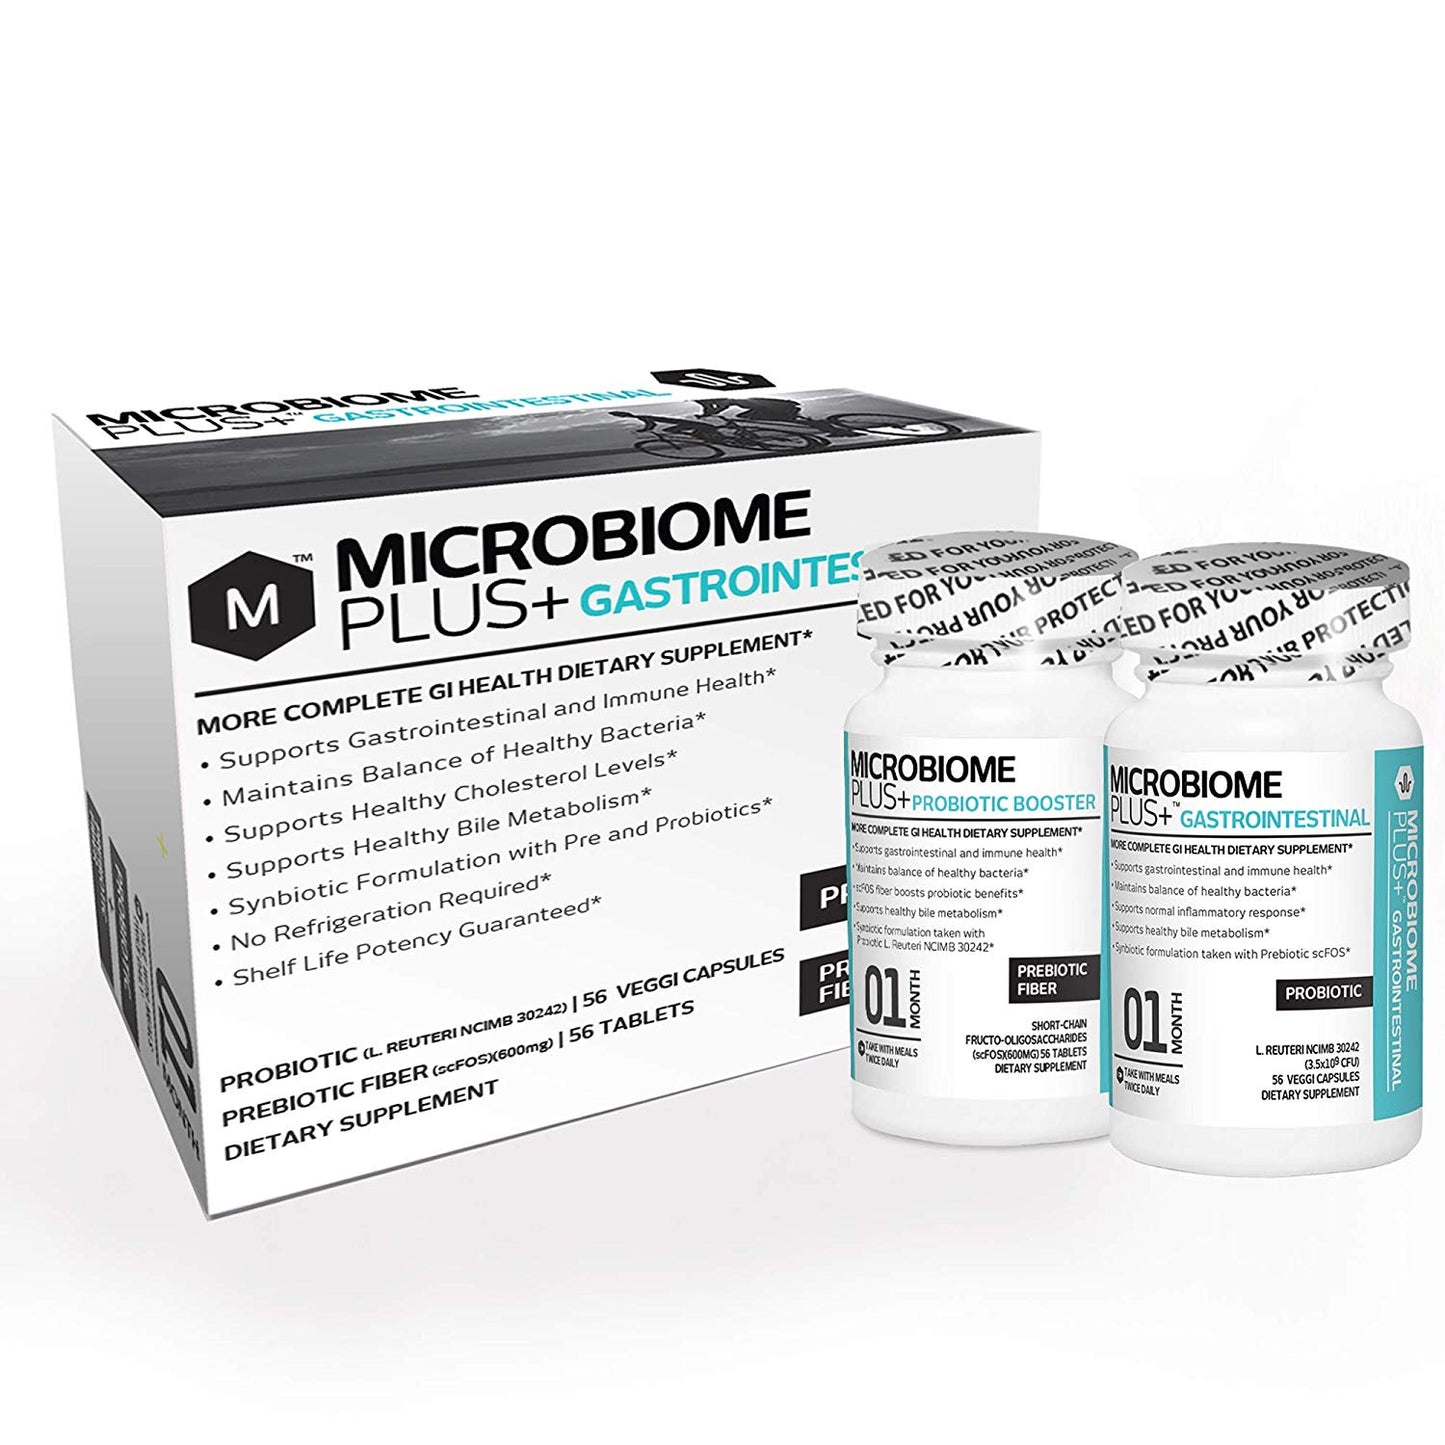 Gastrointestinal Prebiotic and Probiotic Combination Box with Bottles | Microbiome Plus+